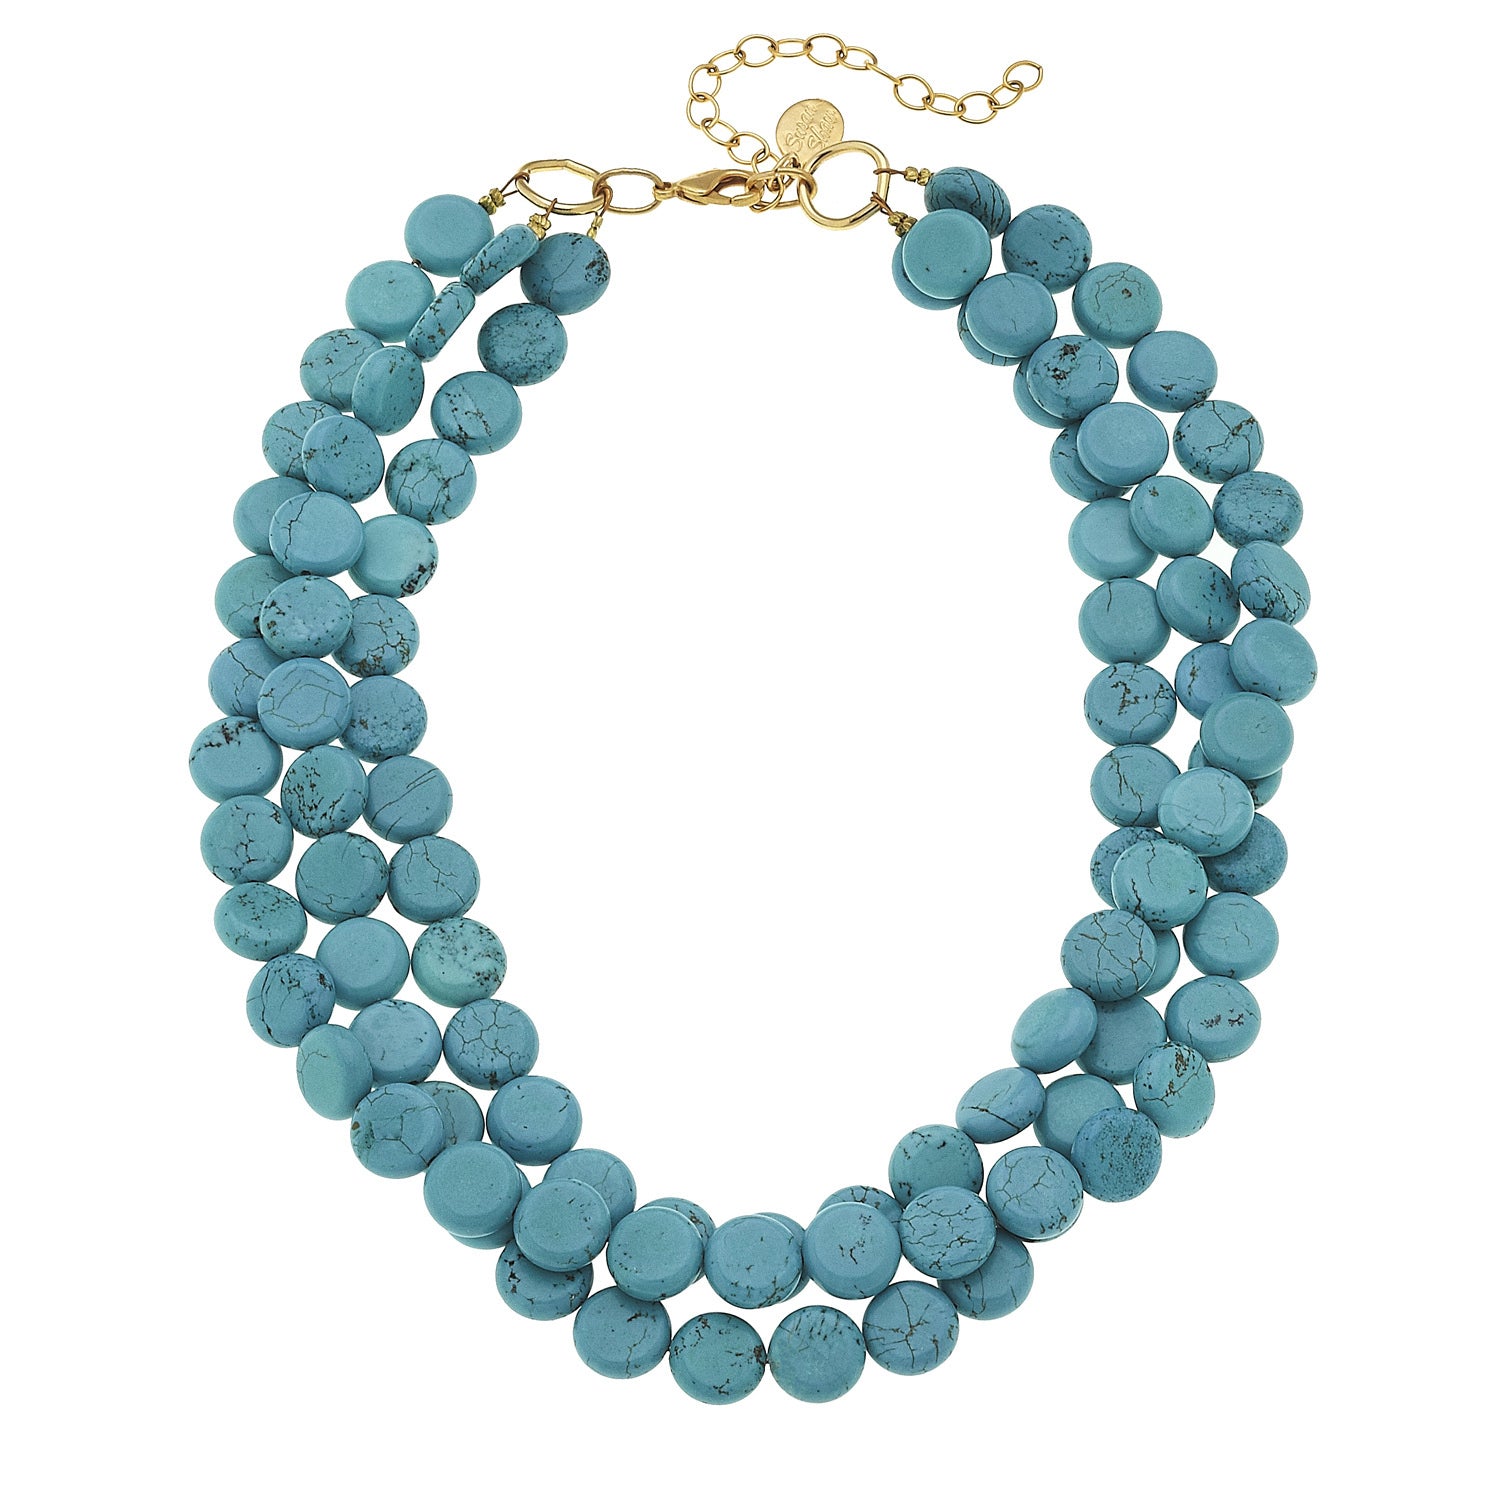 Susan Shaw 3-strand Genuine Turquoise Necklace with GOLD CLASP